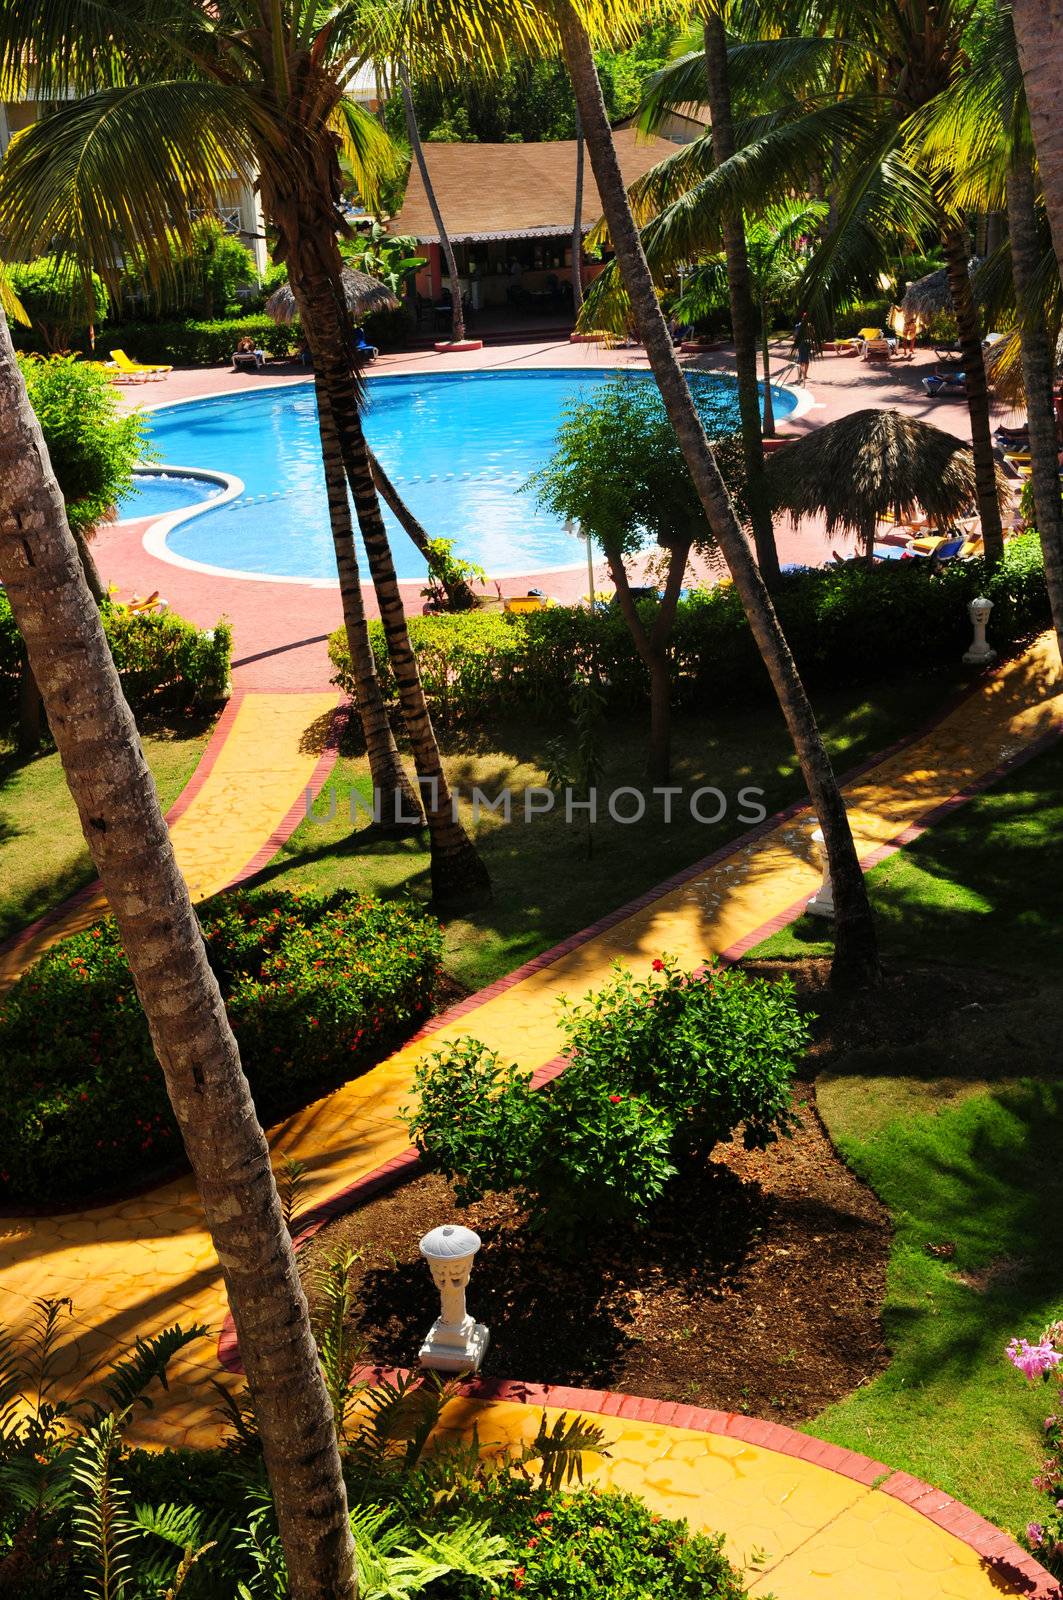 Swimming pool and garden landscaping at tropical resort